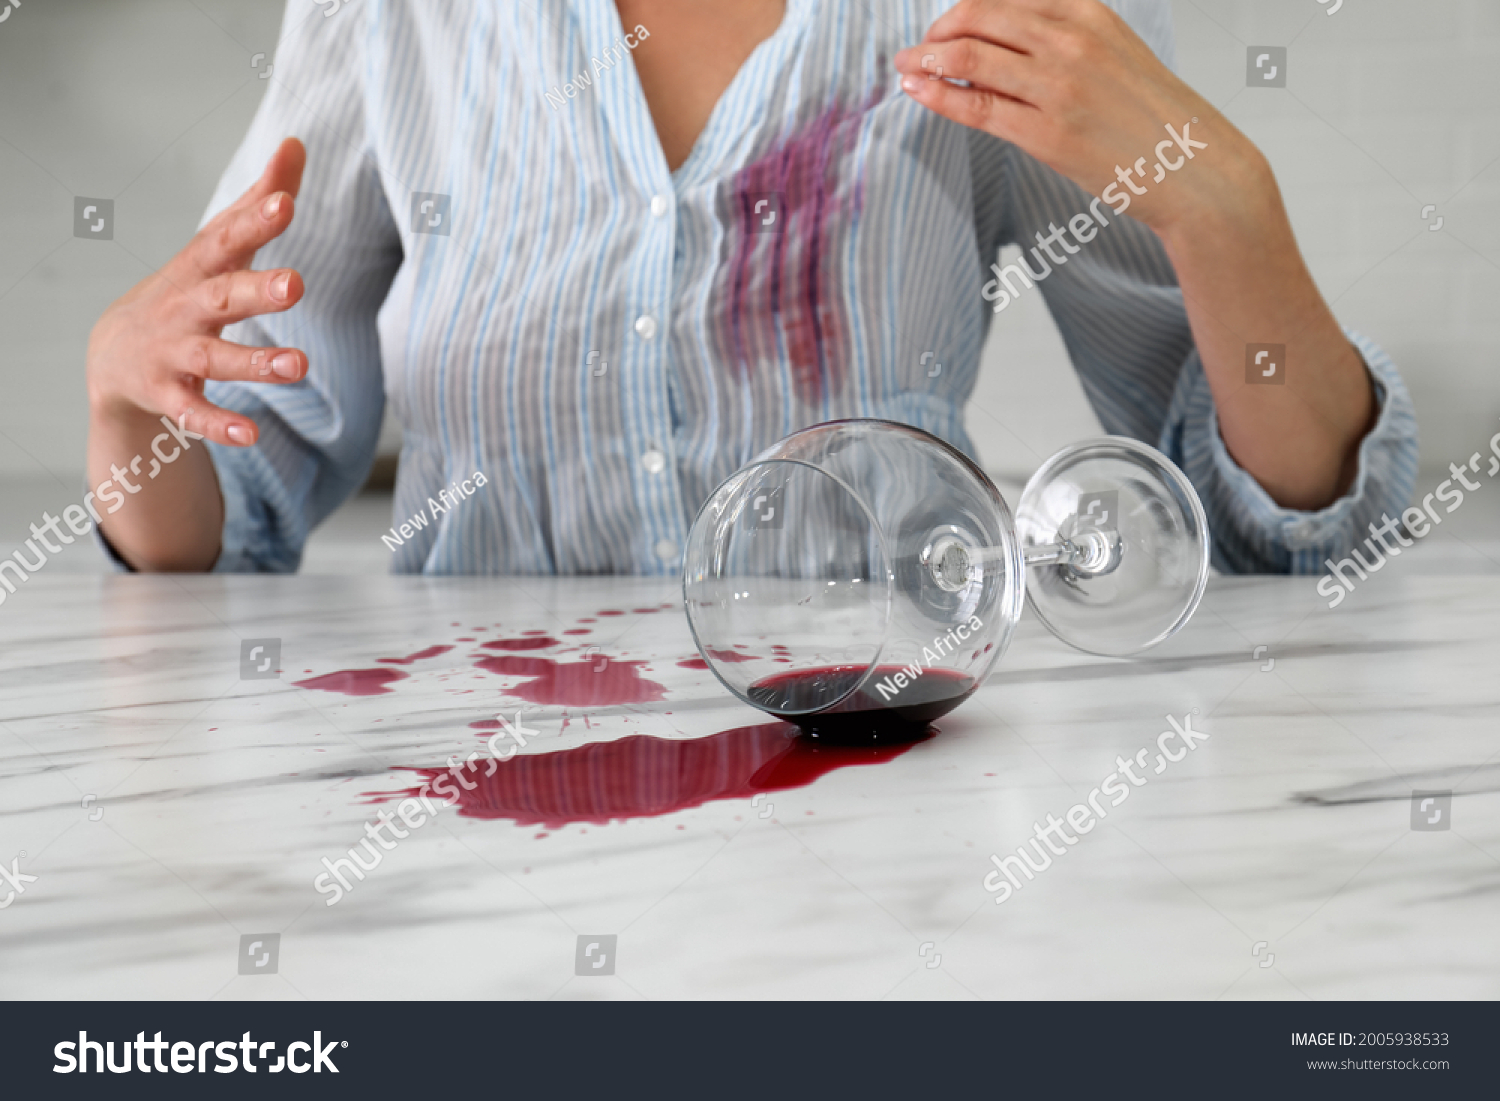 Woman with spilled glass of wine and stain on her shirt at table indoors, closeup #2005938533